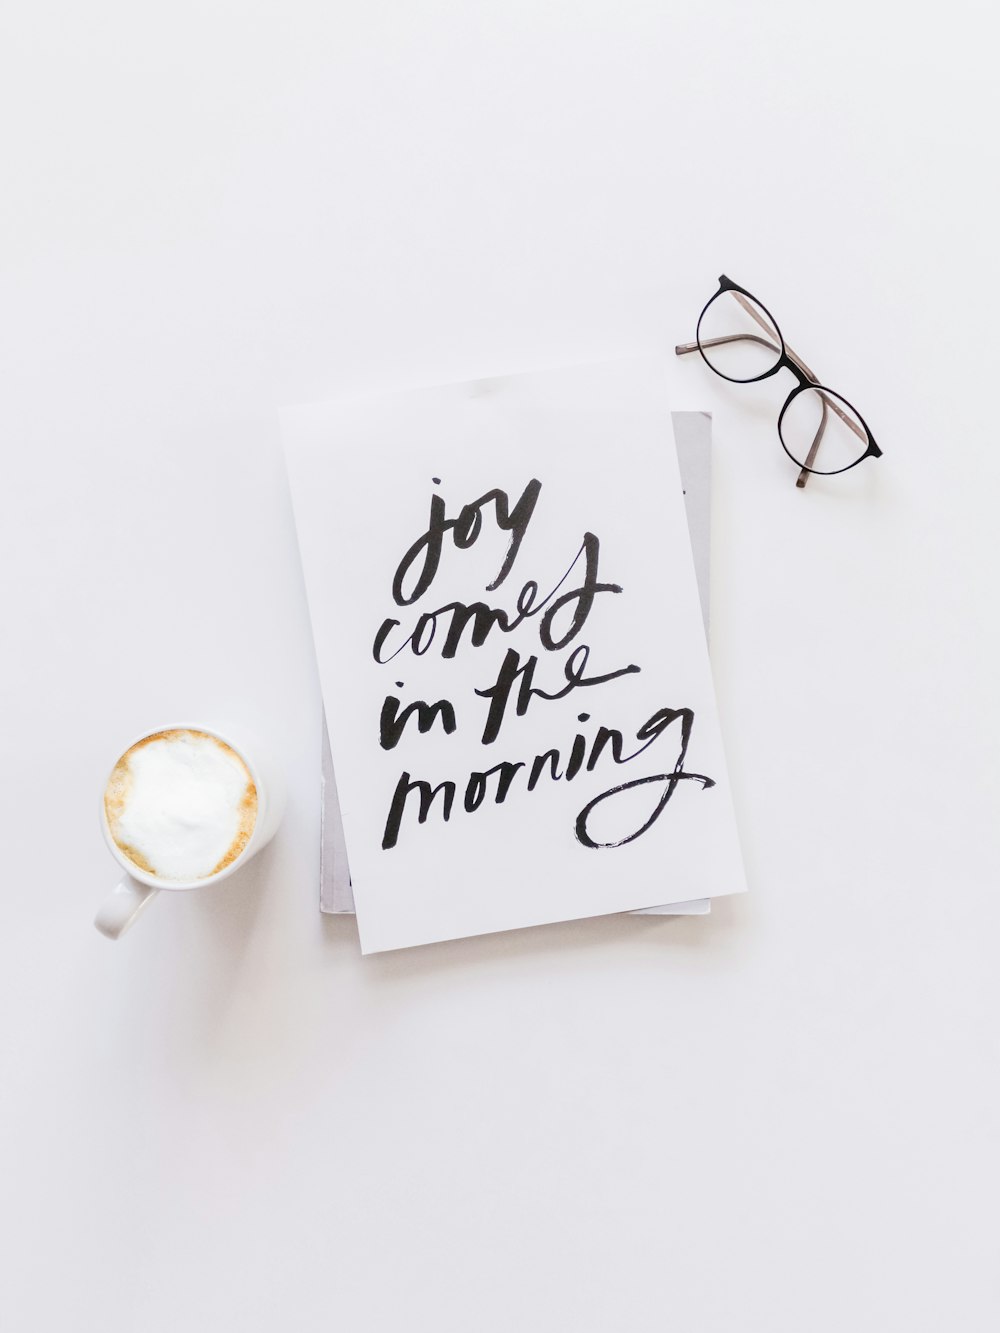 brown framed eyeglasses,latte, and joy comes in the morning note on white surface